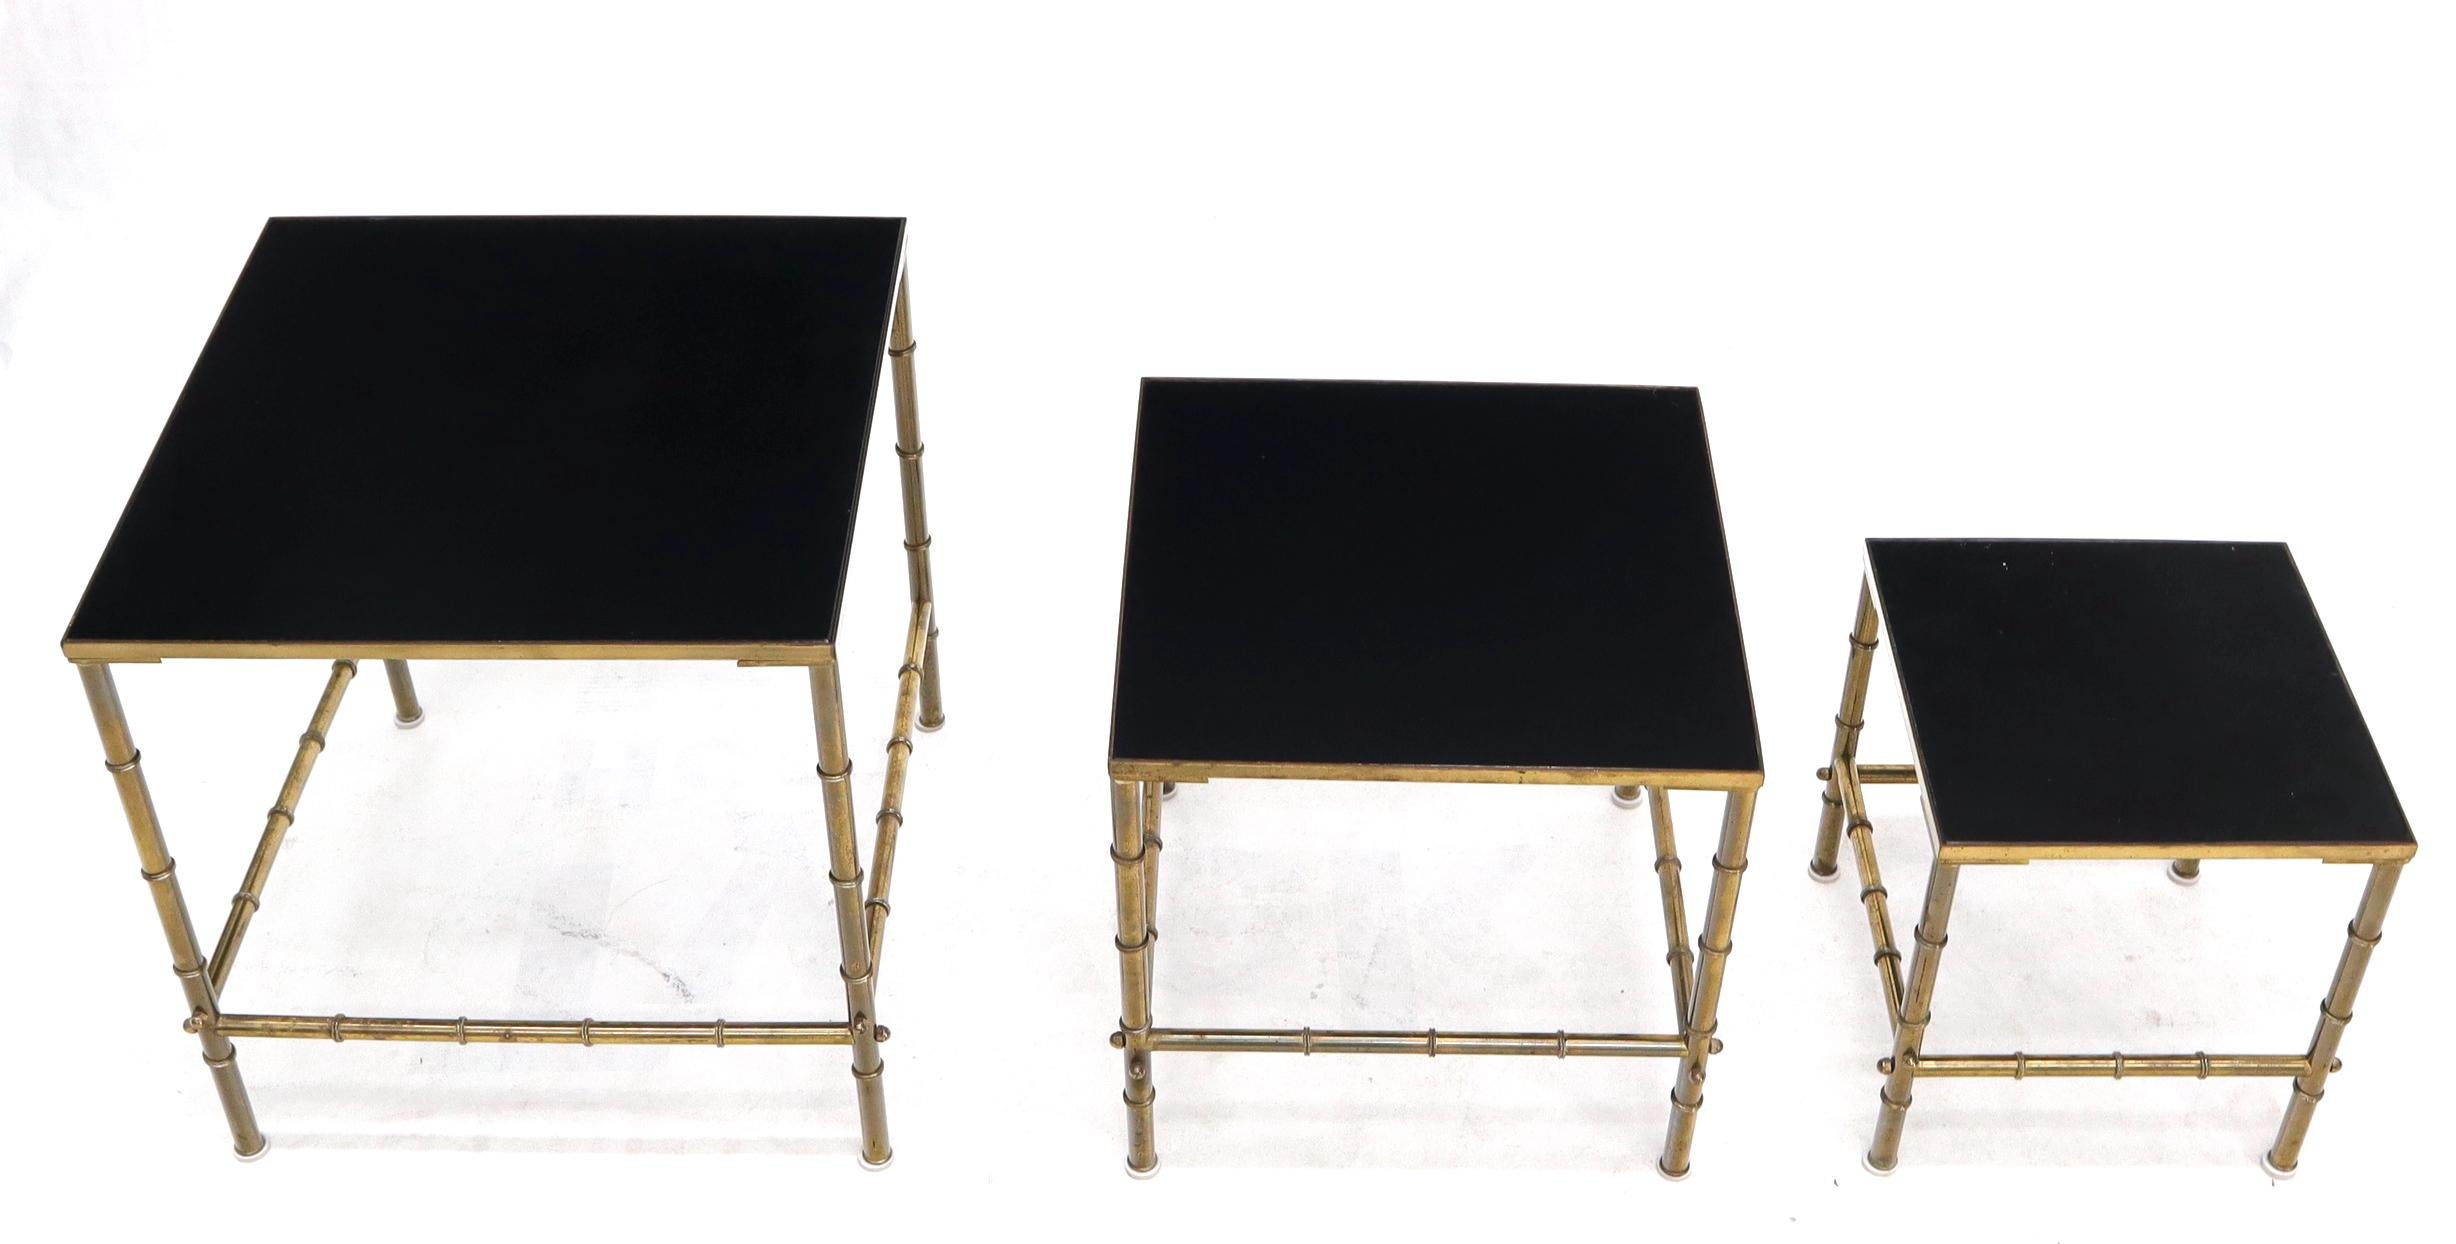 Solid Brass Faux Bamboo Set of 3 Nesting Tables with Black Vitrolite Glass In Good Condition For Sale In Rockaway, NJ